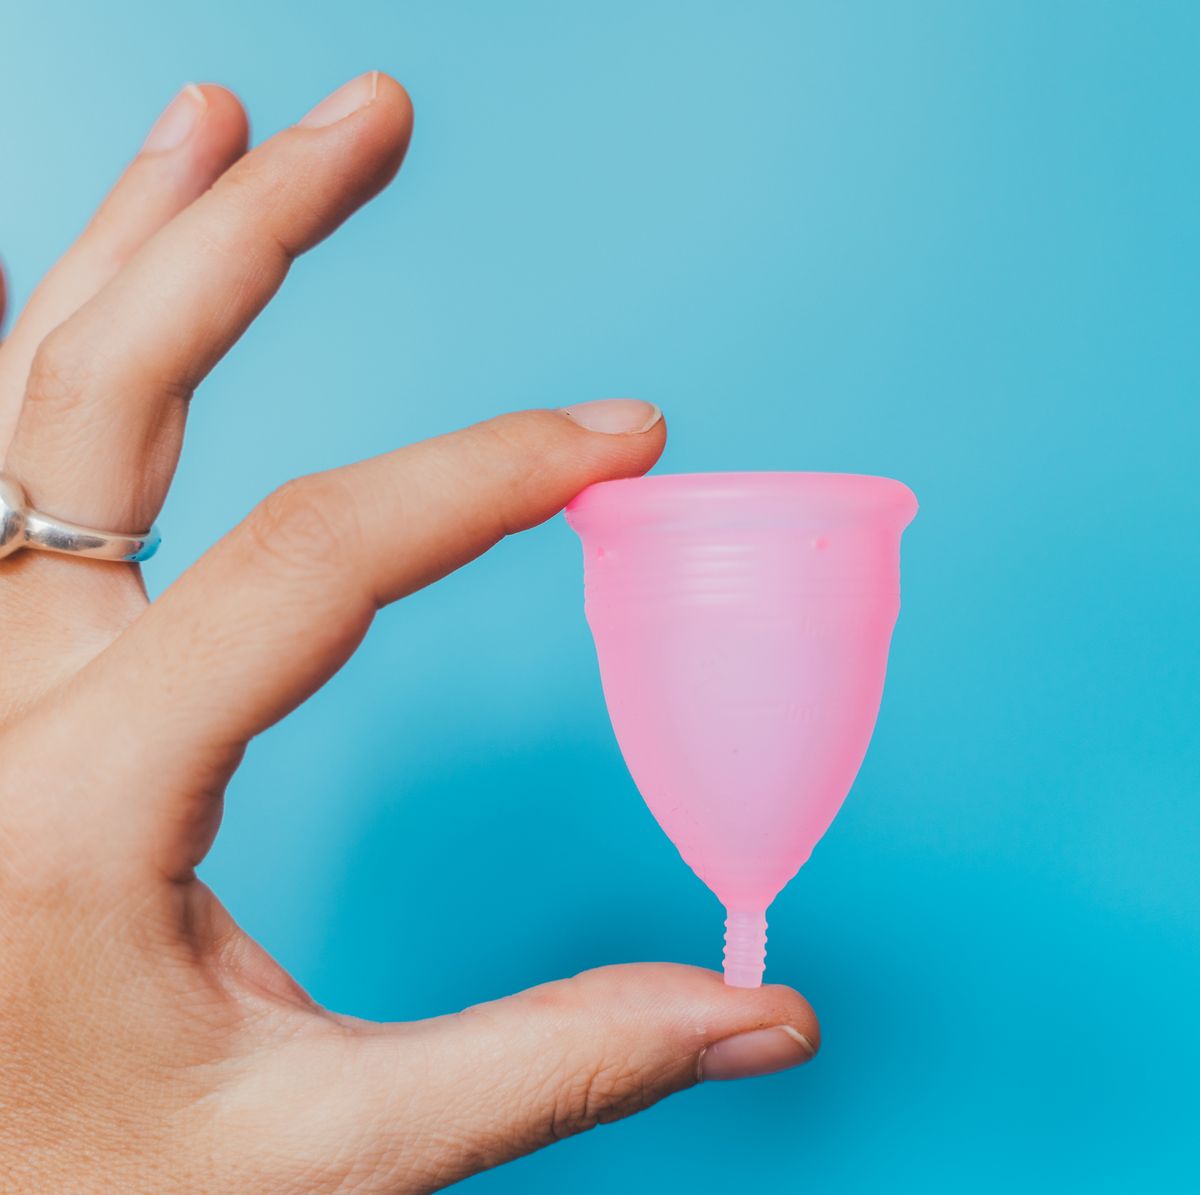 Menstrual cups may pose greater risk of toxic shock syndrome than tampons,  study claims, The Independent